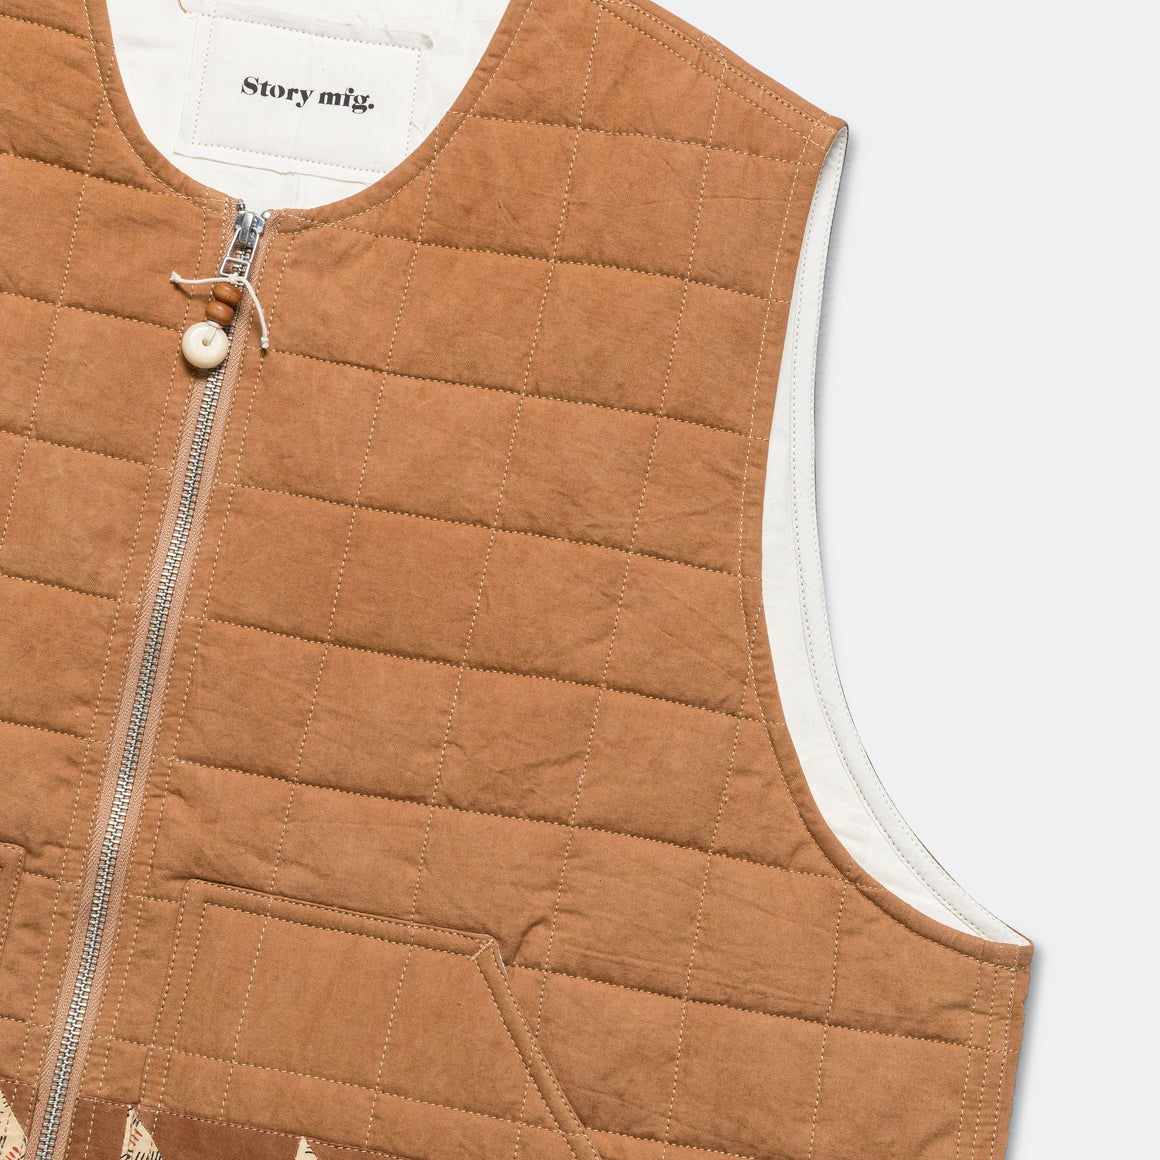 Story mfg. - Saturn Vest - Brown Lightning - UP THERE